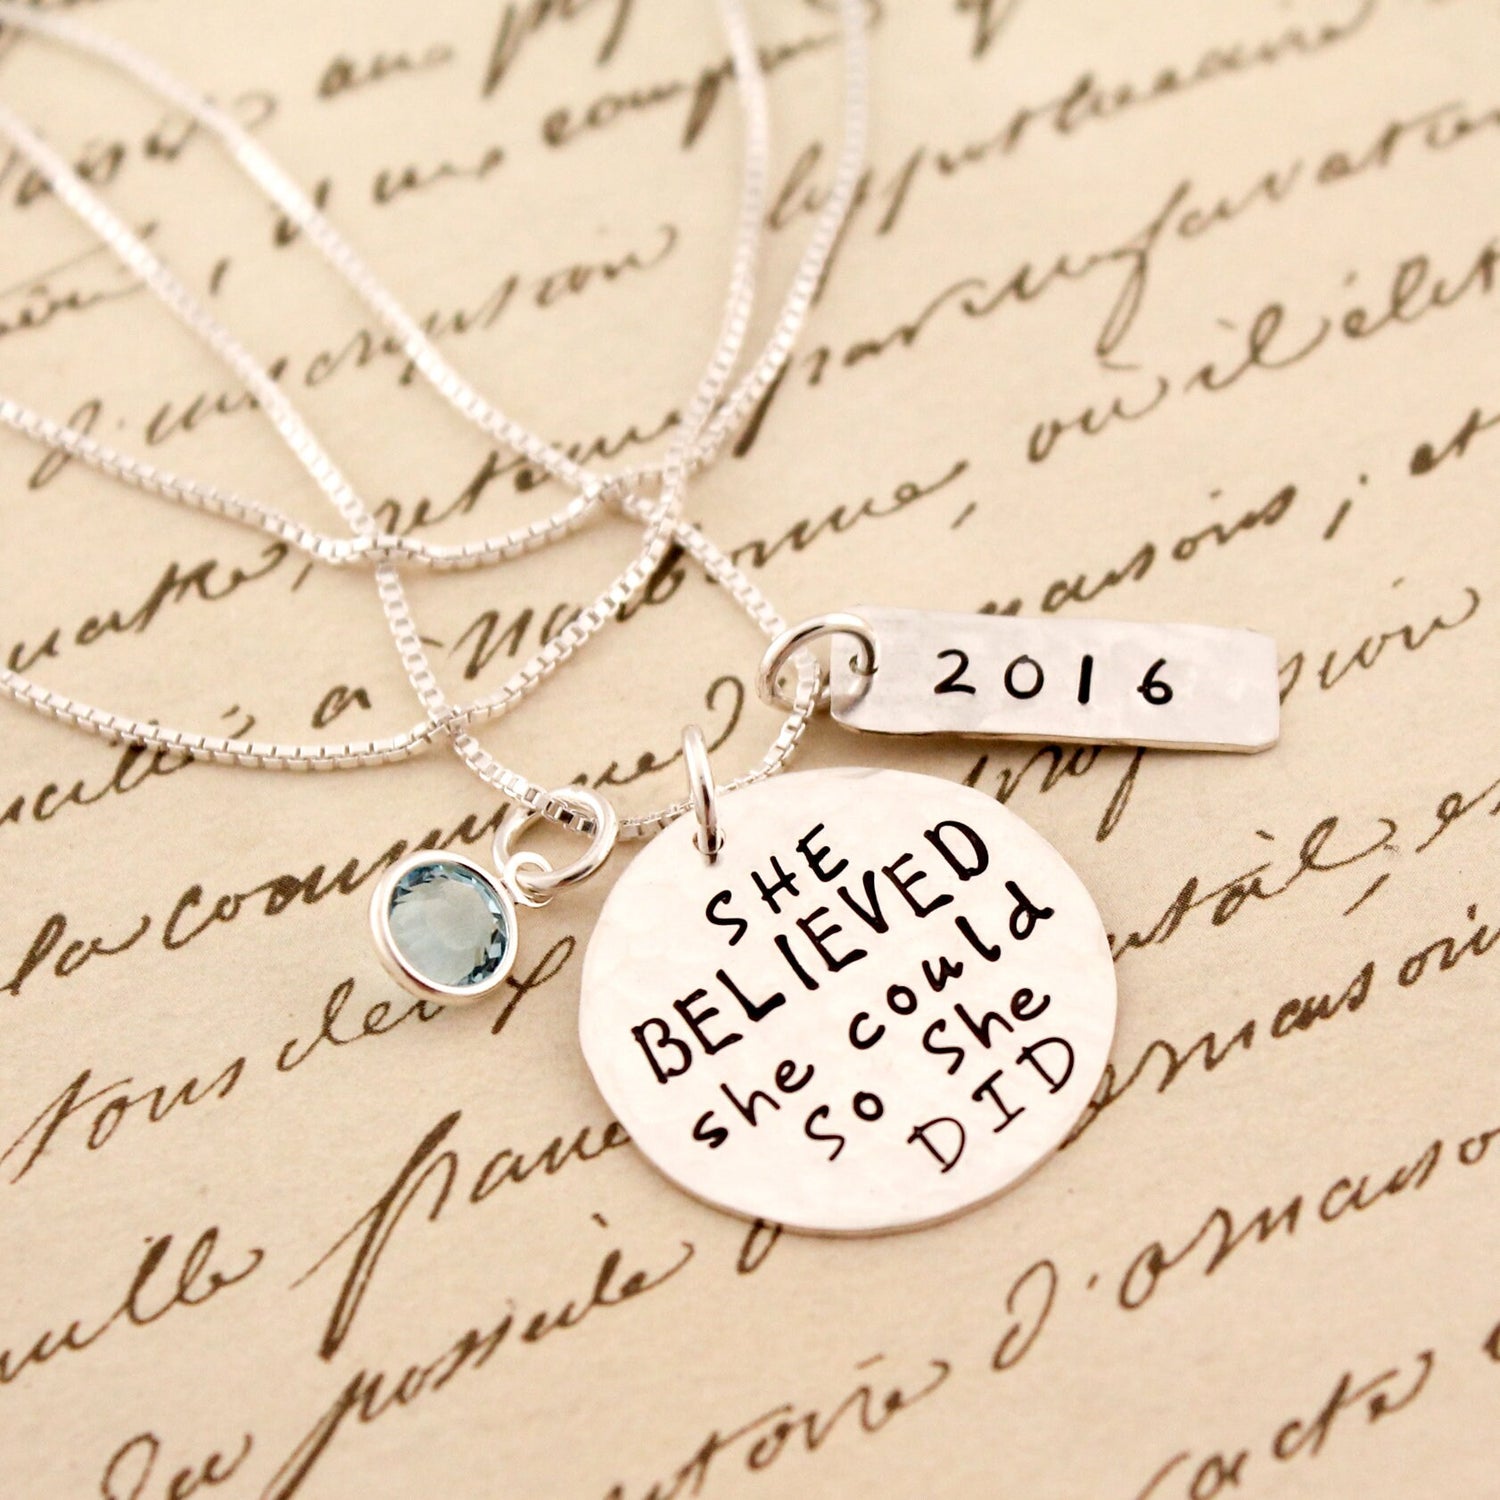 She Believed She Could So She Did Necklace in Sterling Silver with Year, Inspirational Graduation Necklace, Hand Stamped Grad Personalized